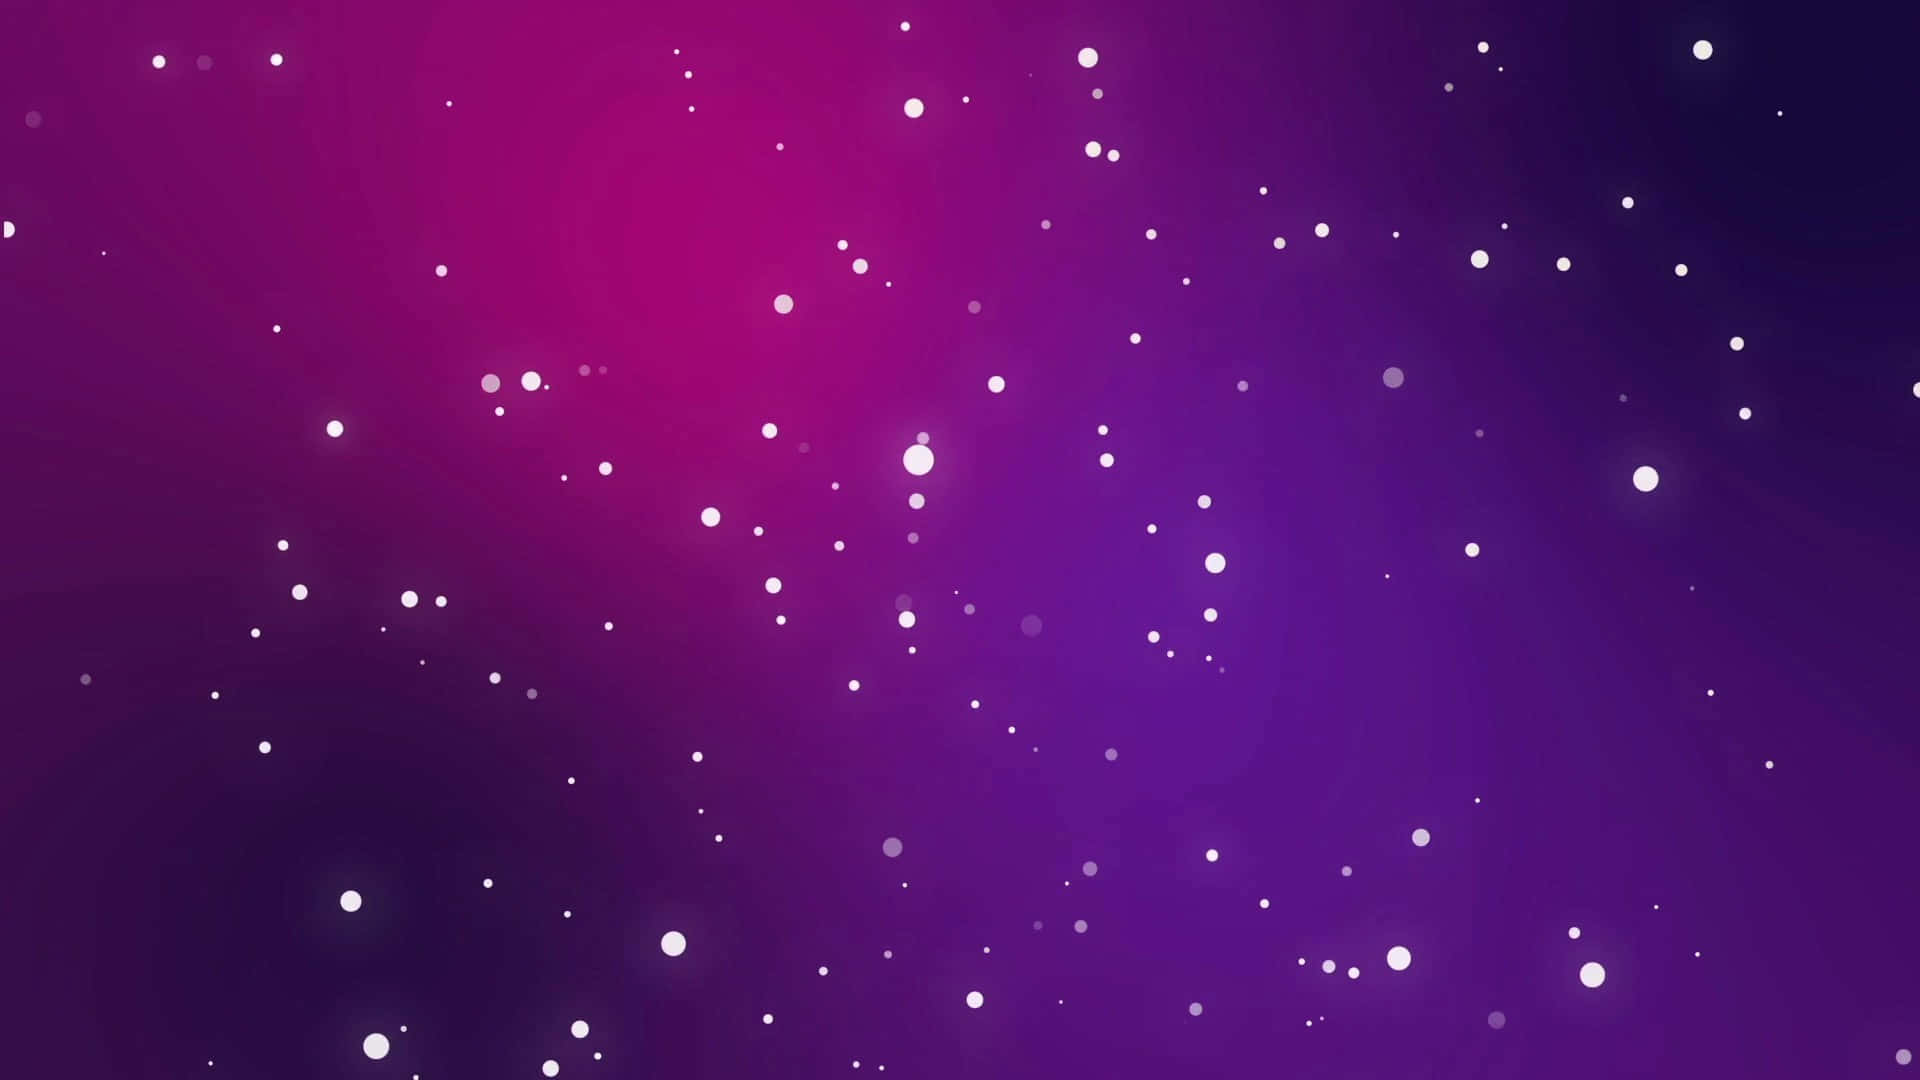 The brilliance of a purple star, shining brightly in a deep blue night sky. Wallpaper